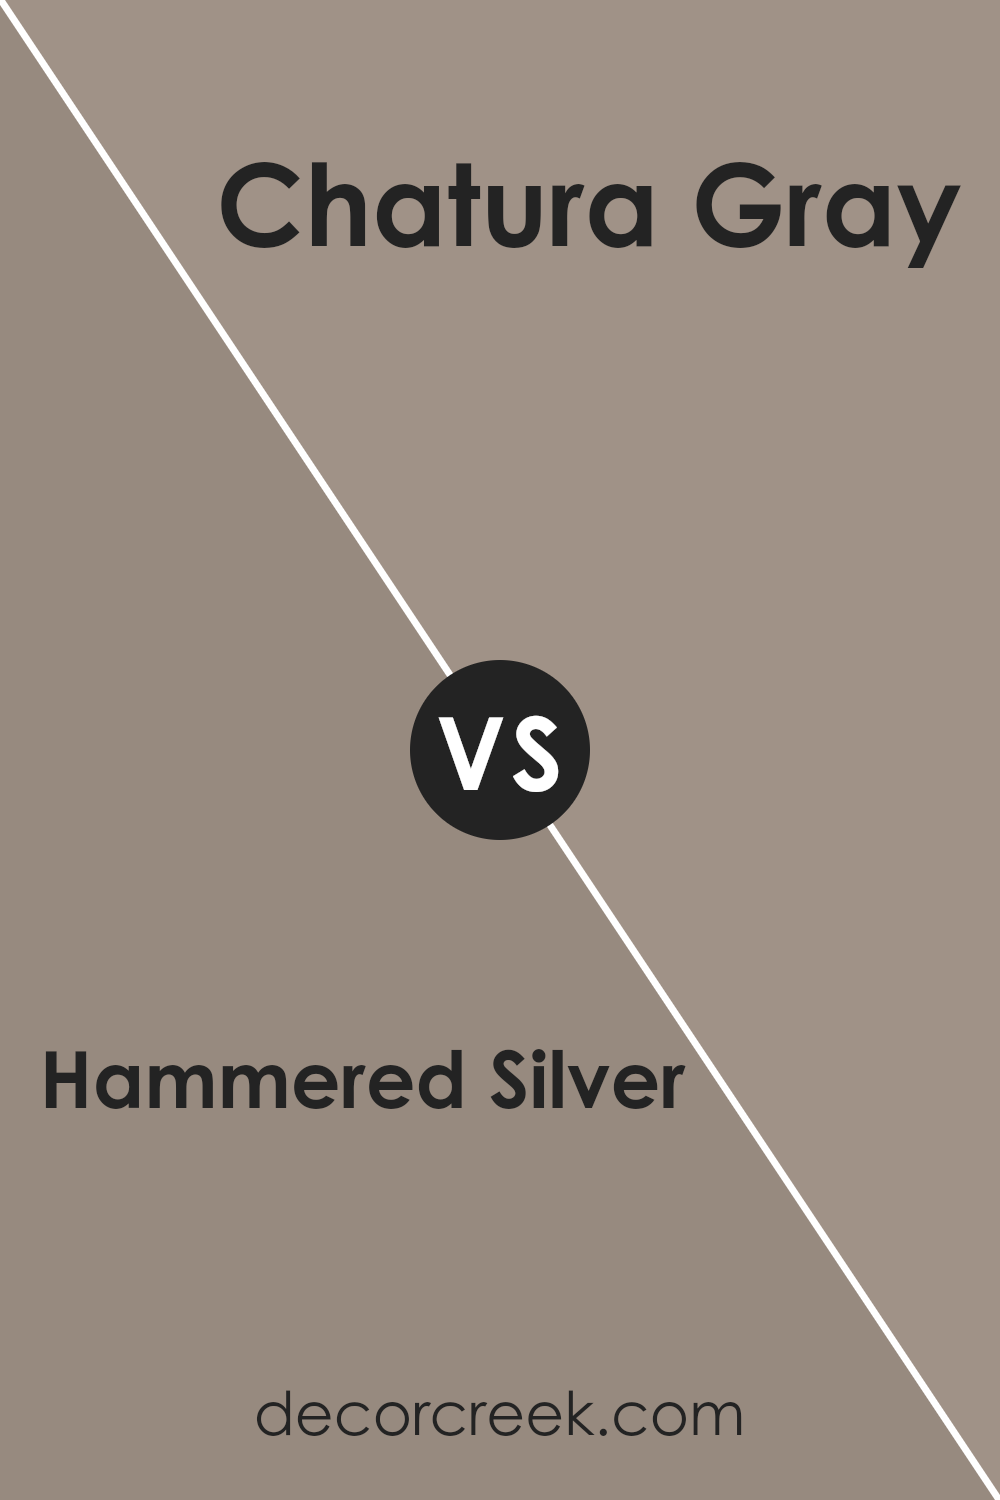 hammered_silver_sw_2840_vs_chatura_gray_sw_9169